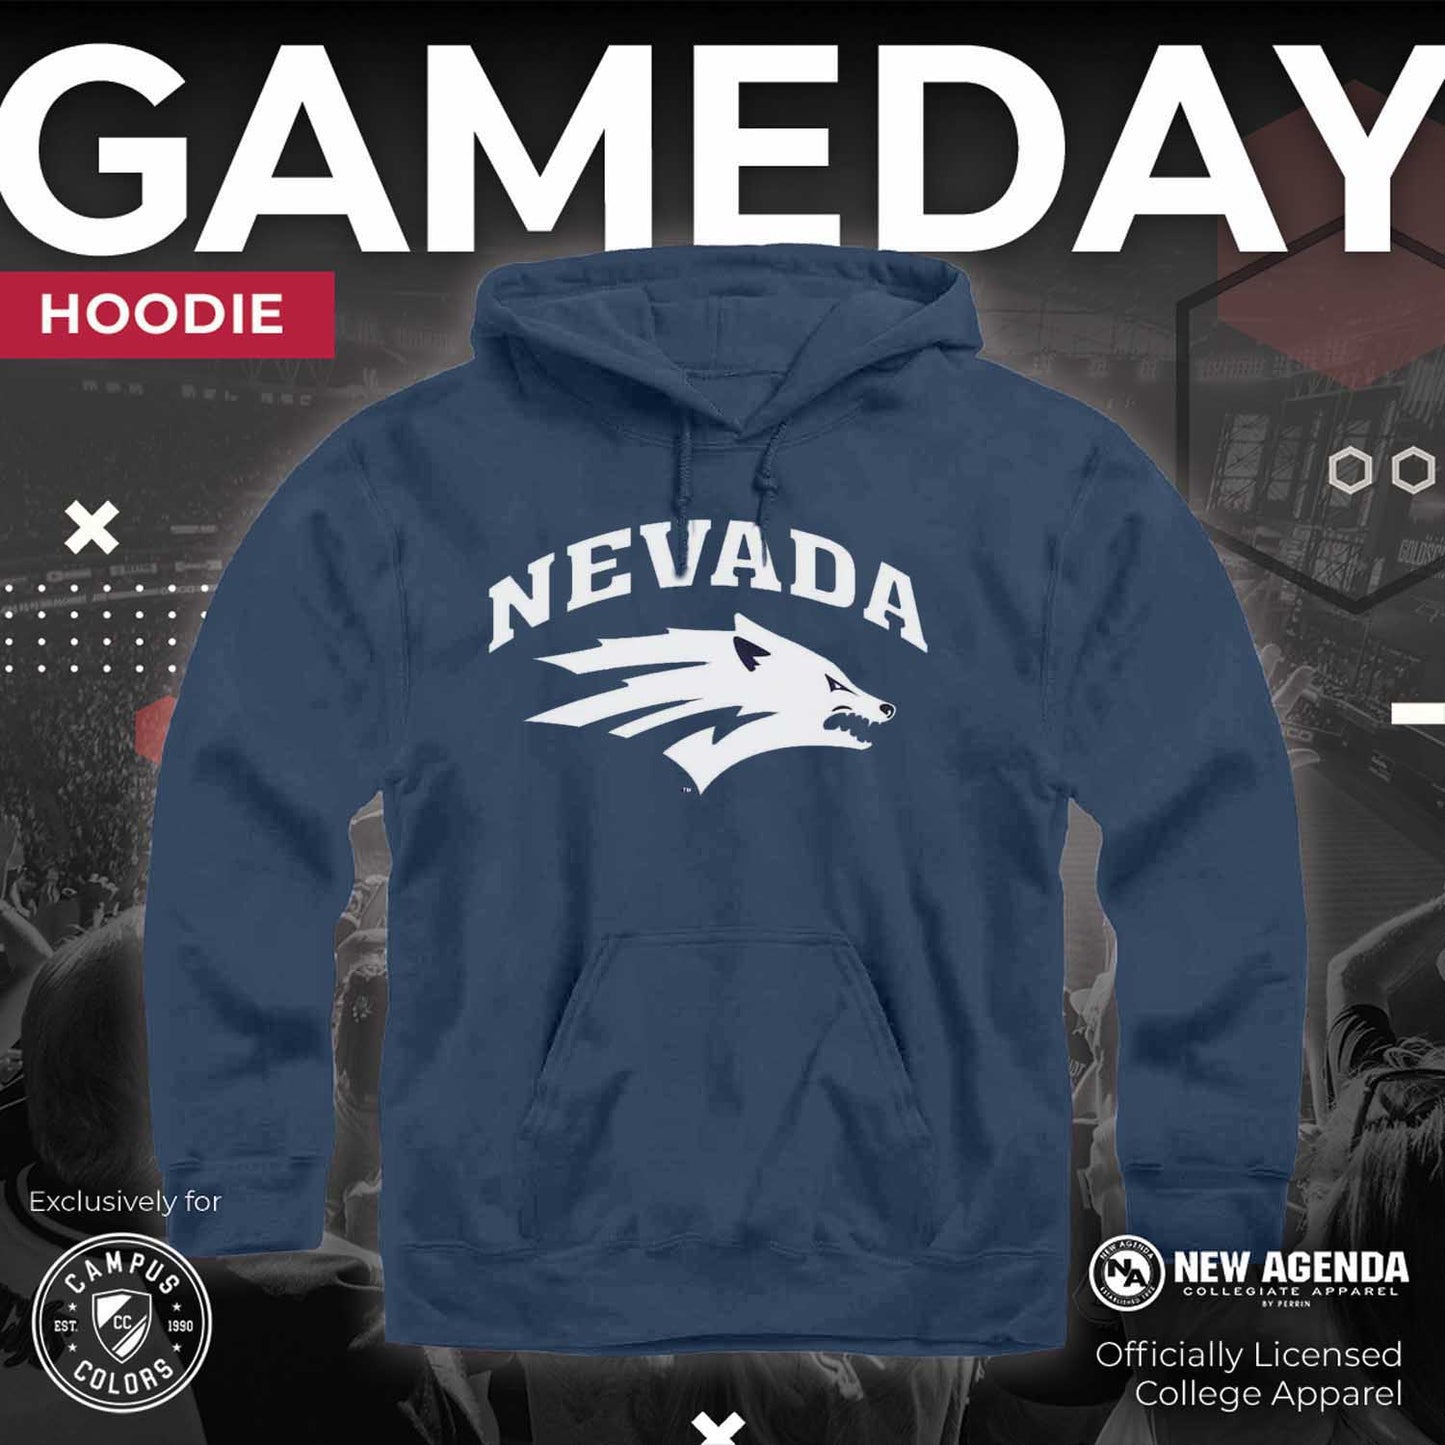 Nevada Wolf Pack Adult Arch & Logo Soft Style Gameday Hooded Sweatshirt - Navy